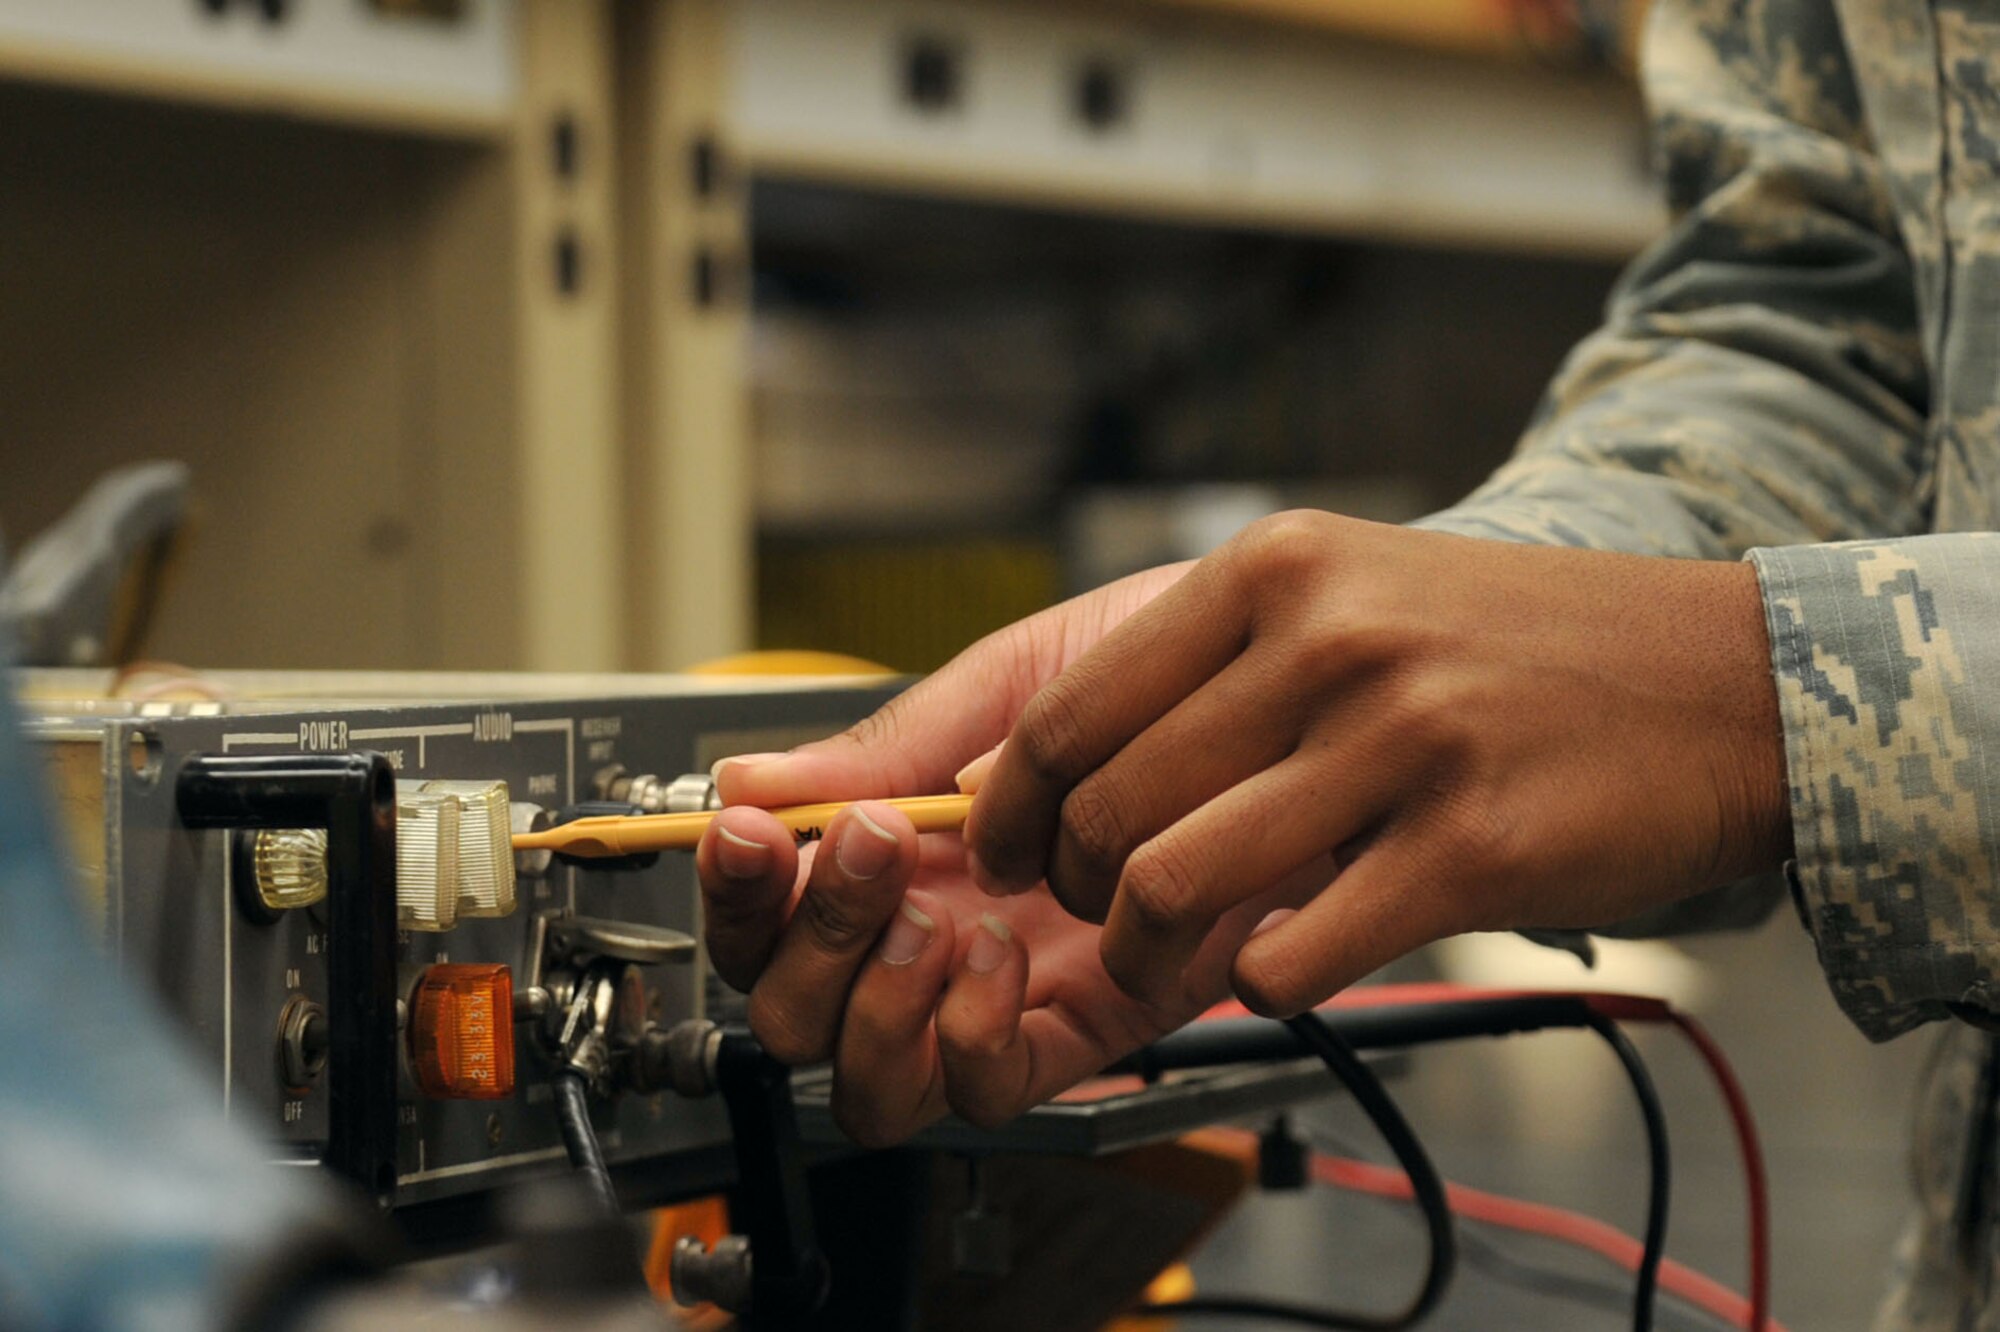 U.S. Air Force Airman 1st Class Darricka Sides, 20th Operations Support Squadron (OSS) airfield systems technician, adjusts a radio receiver for audio cut-off levels at Shaw Air Force Base, S.C., Oct. 4, 2017.